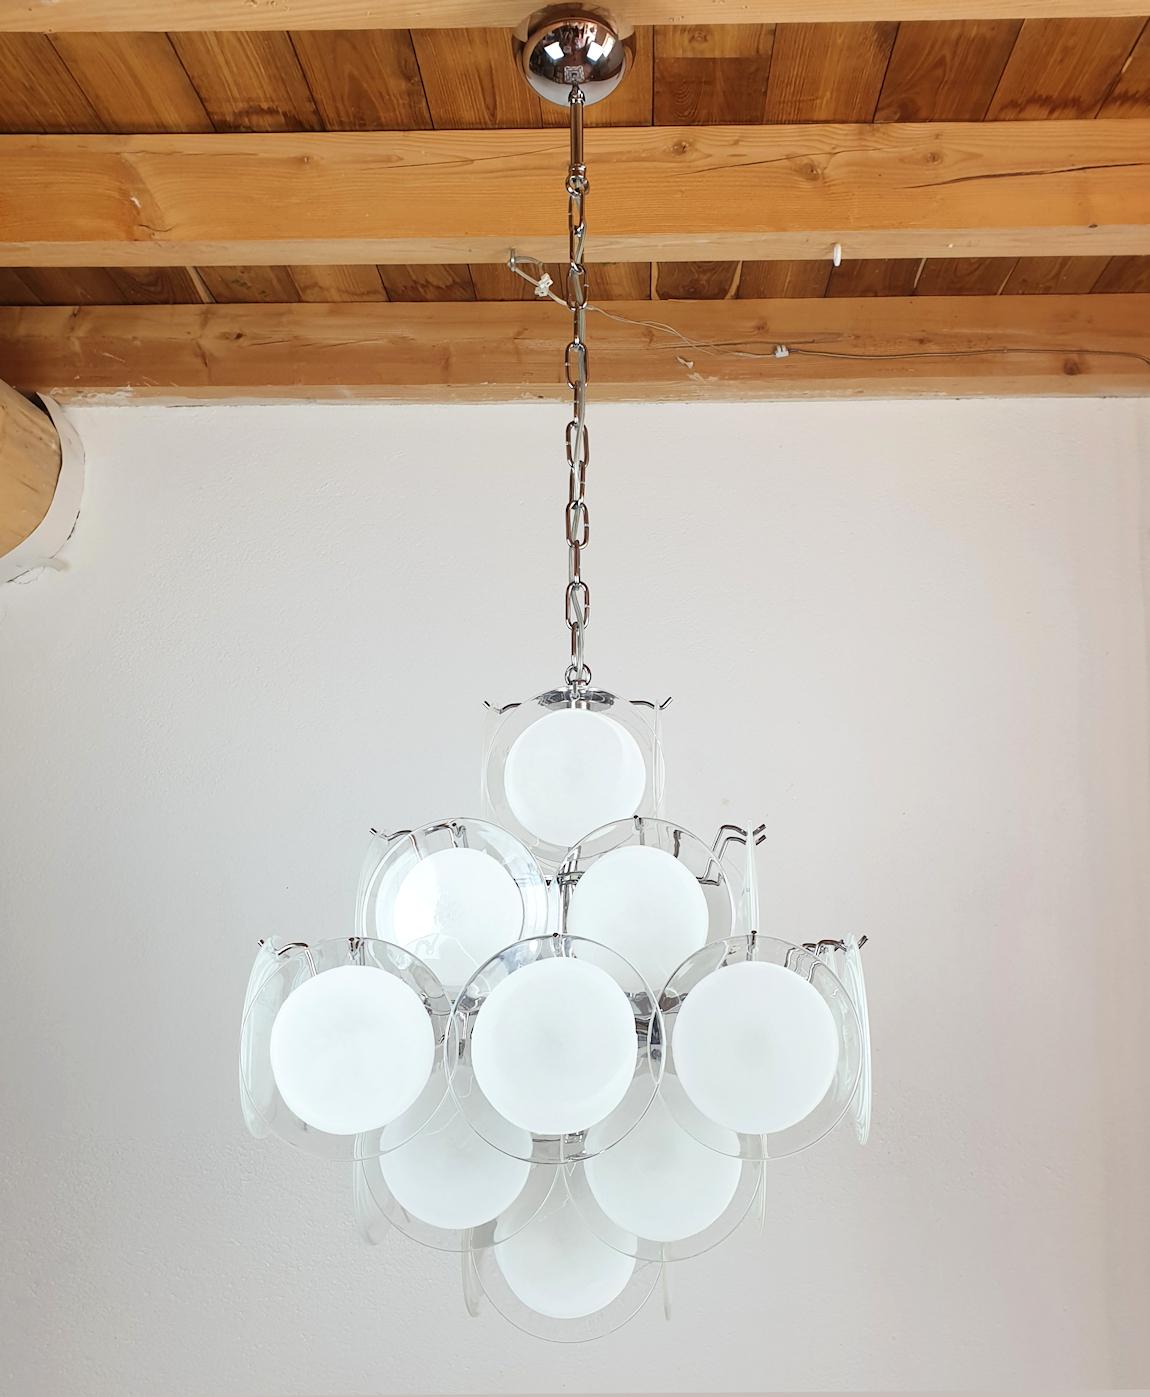 Vintage Modern hand blown murano glass chandelier, by Vistosi, Italy, circa 1980s.
The Mid-Century Modern chandelier is made of white and clear Murano glass discs on a chrome frame.
The shape is pyramidal, giving it a Mid Mod style.
It has 6